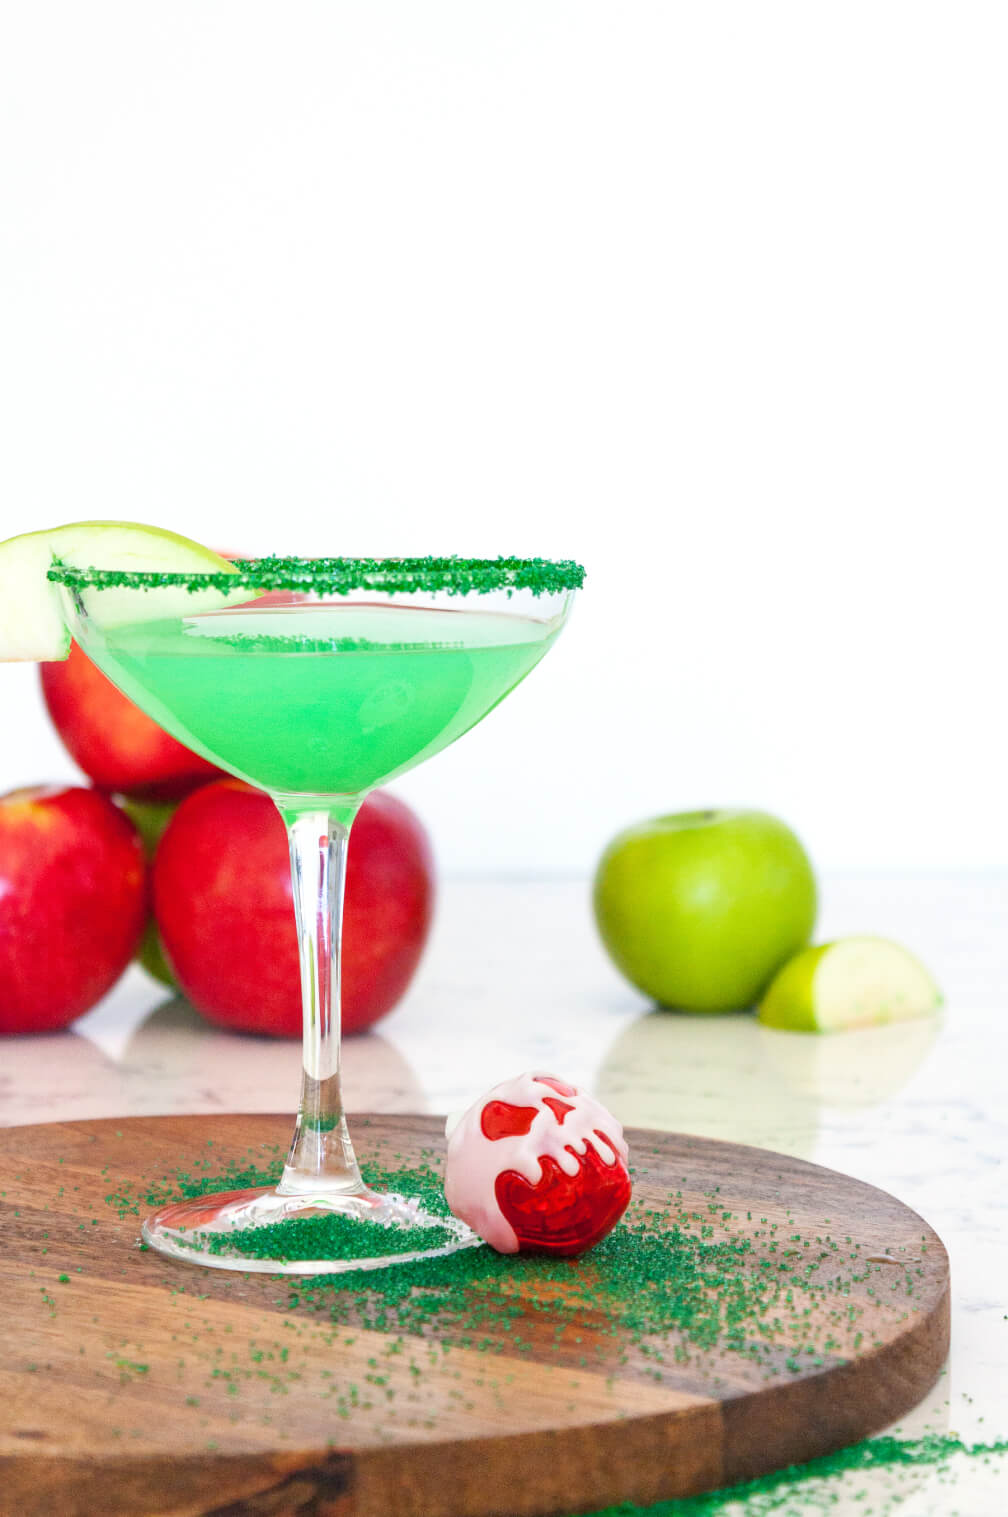 In honor of the first ever animated movie Snow White, I created the Evil Queens Poisoned Apple Martini recipe as part of my Disney Cocktails series.